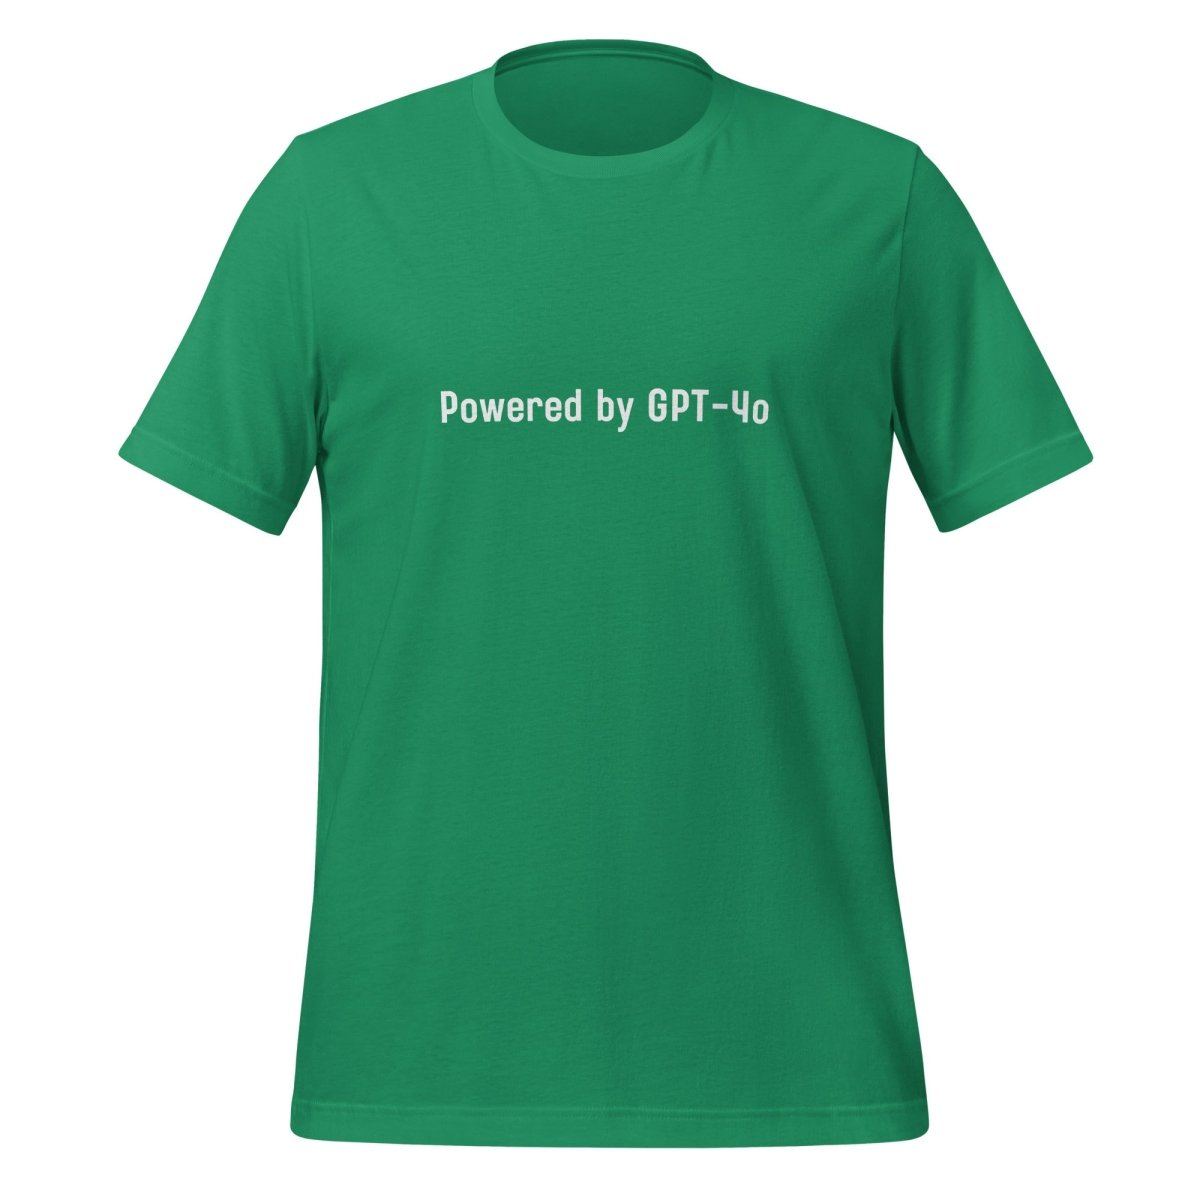 Powered by GPT - 4o T - Shirt 3 (unisex) - Kelly - AI Store